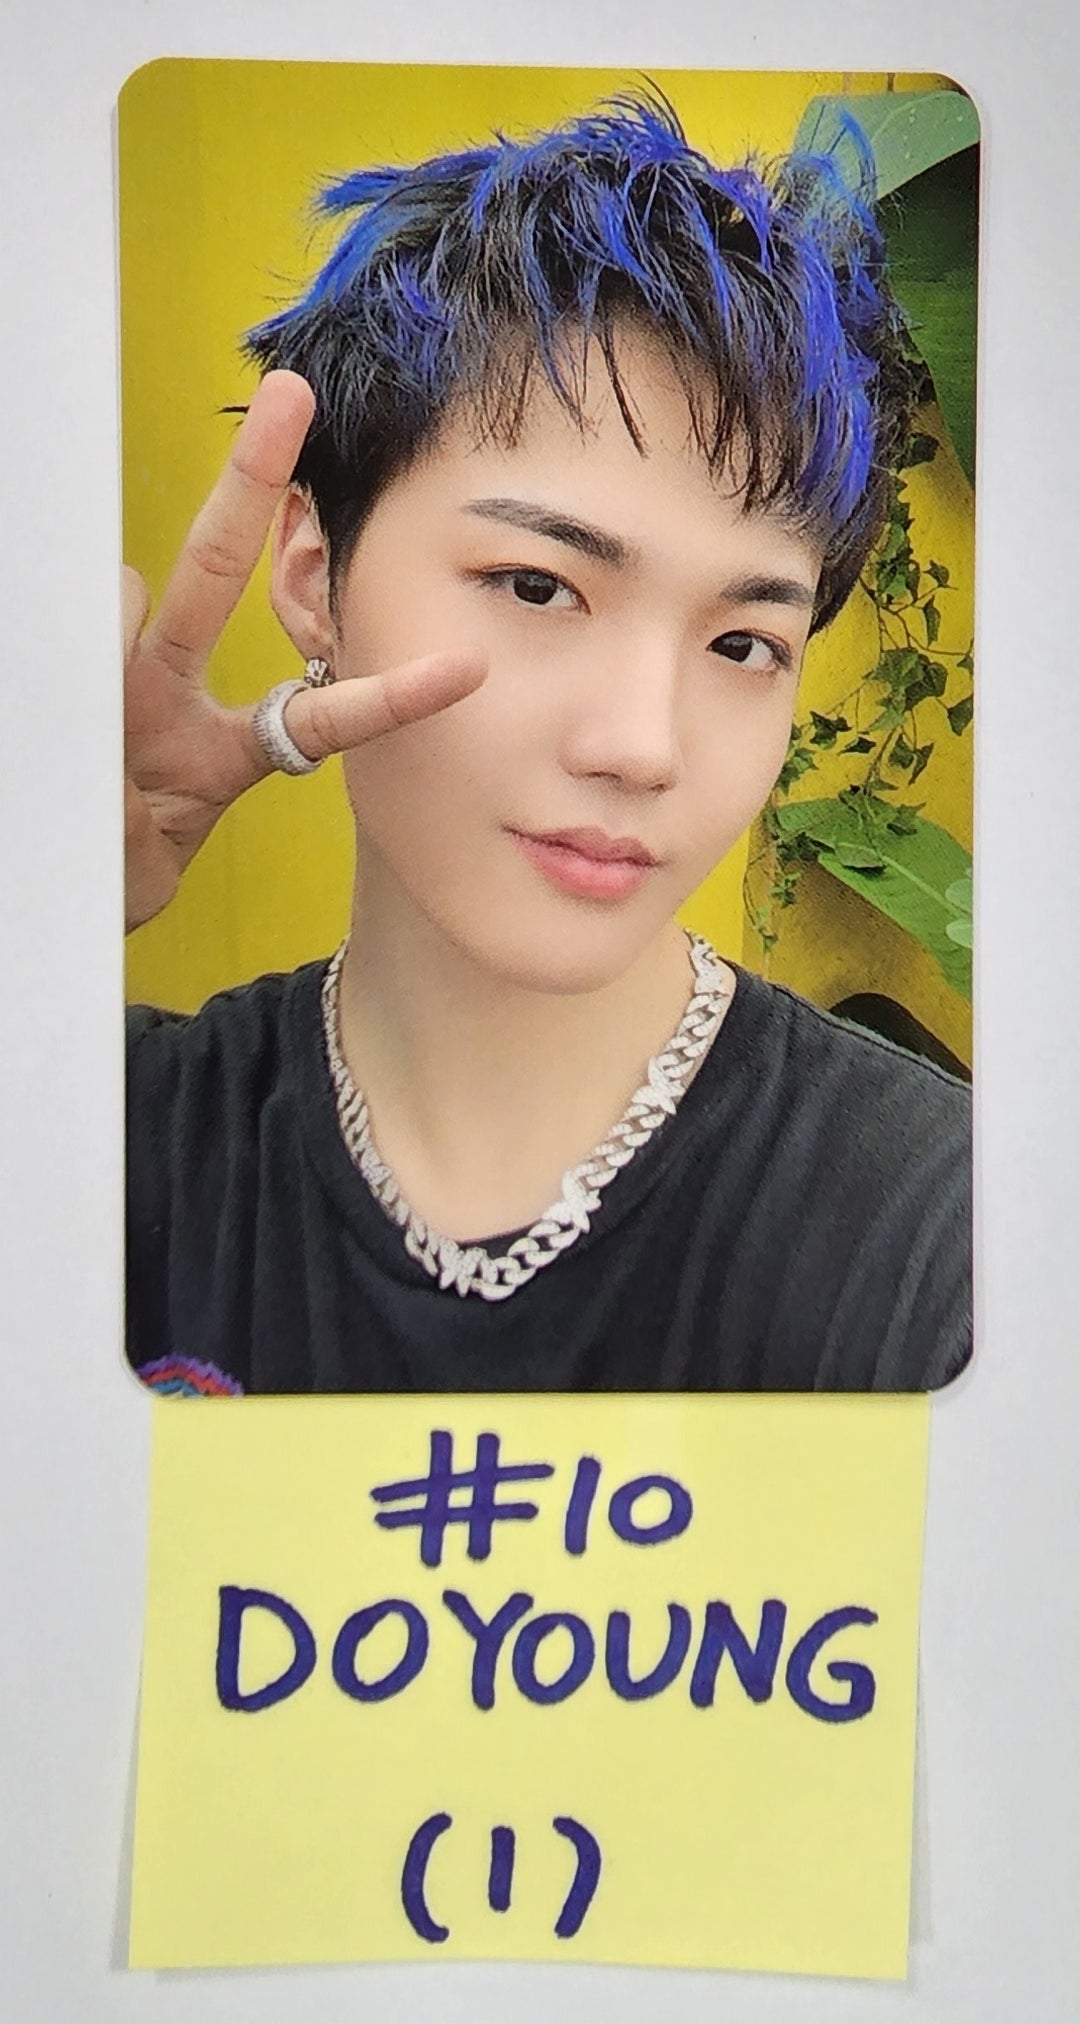 Treasure "Tour Hello IN SEOUL" - Official Trading Photocard